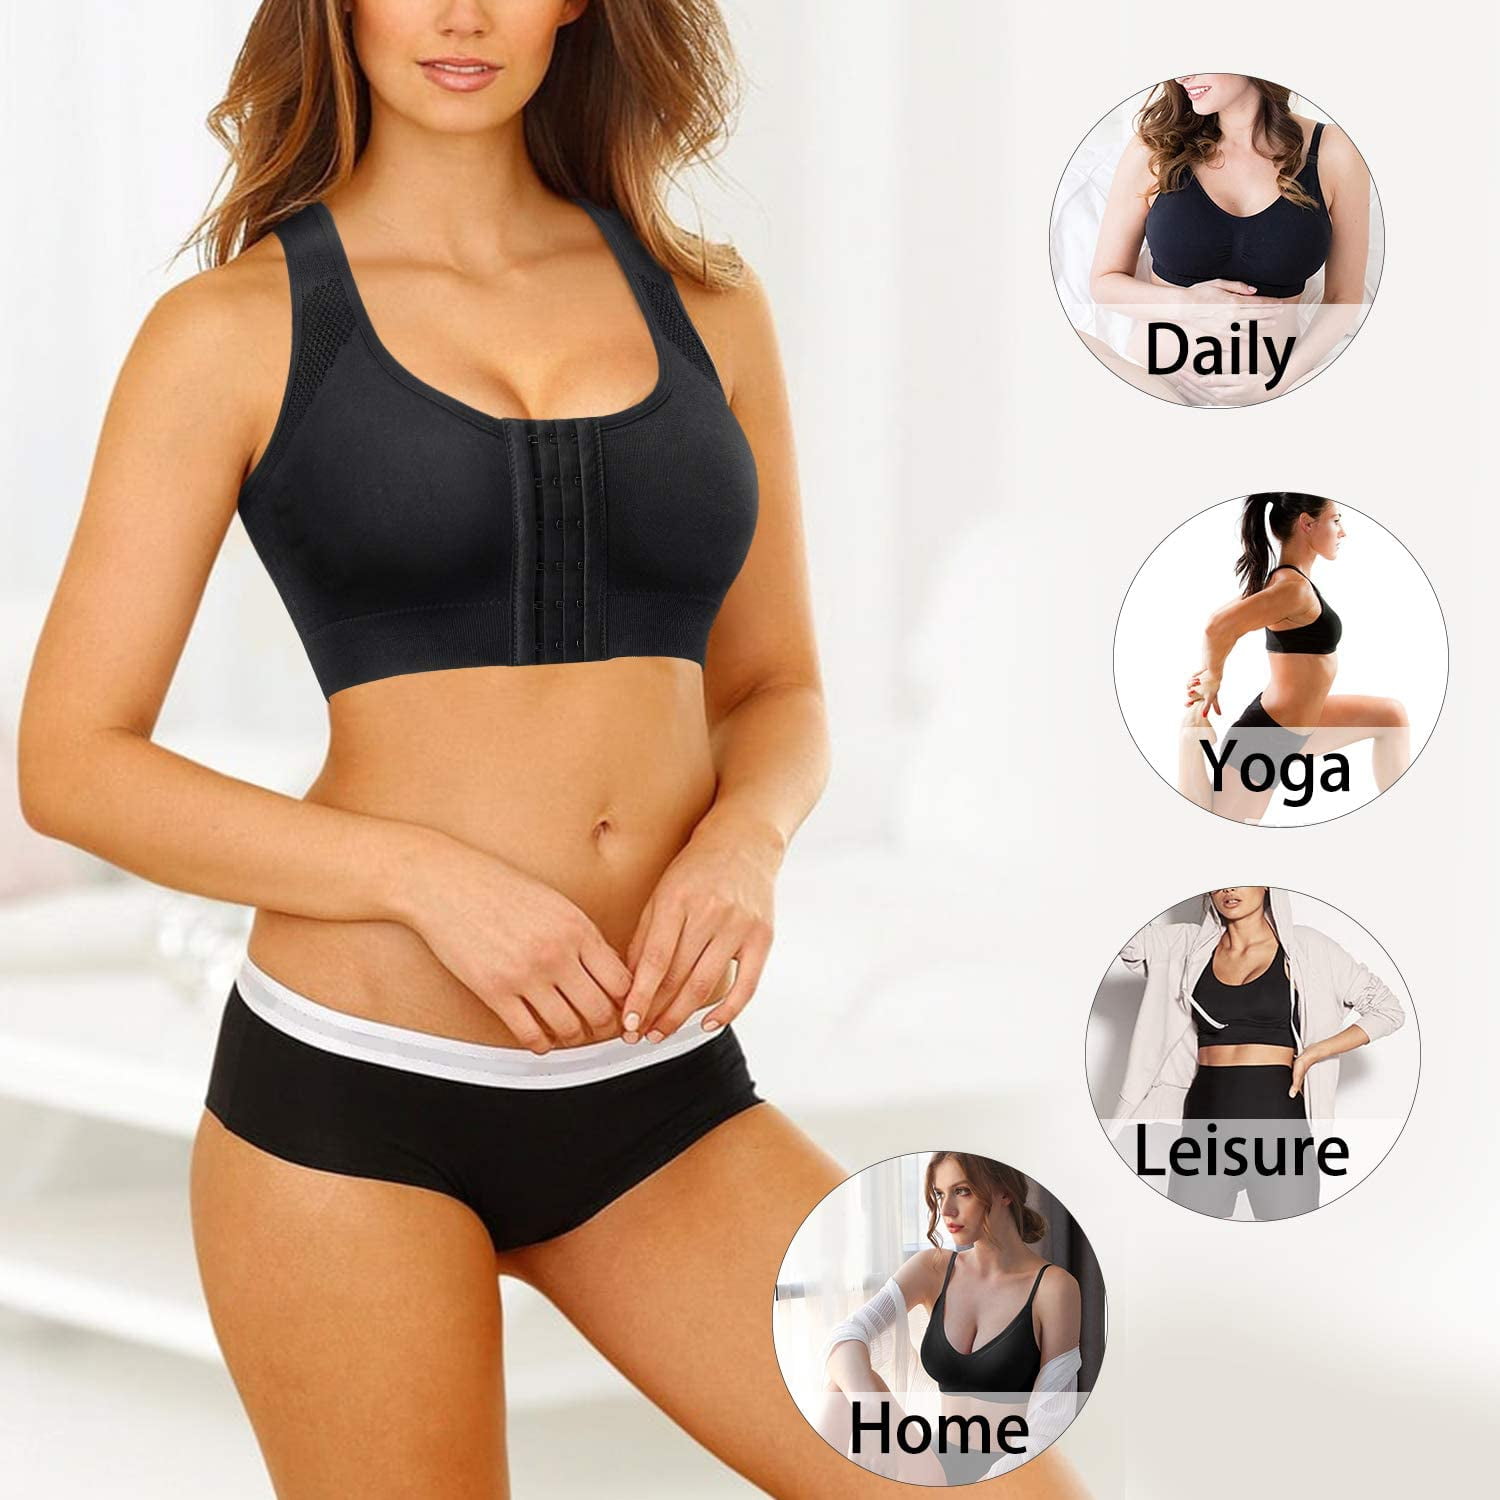 Eleady Women Posture Bras Front Closure Bras with Back Support Full  Coverage Wireless Tops Adjustable Posture Corrector(Beige Medium) 